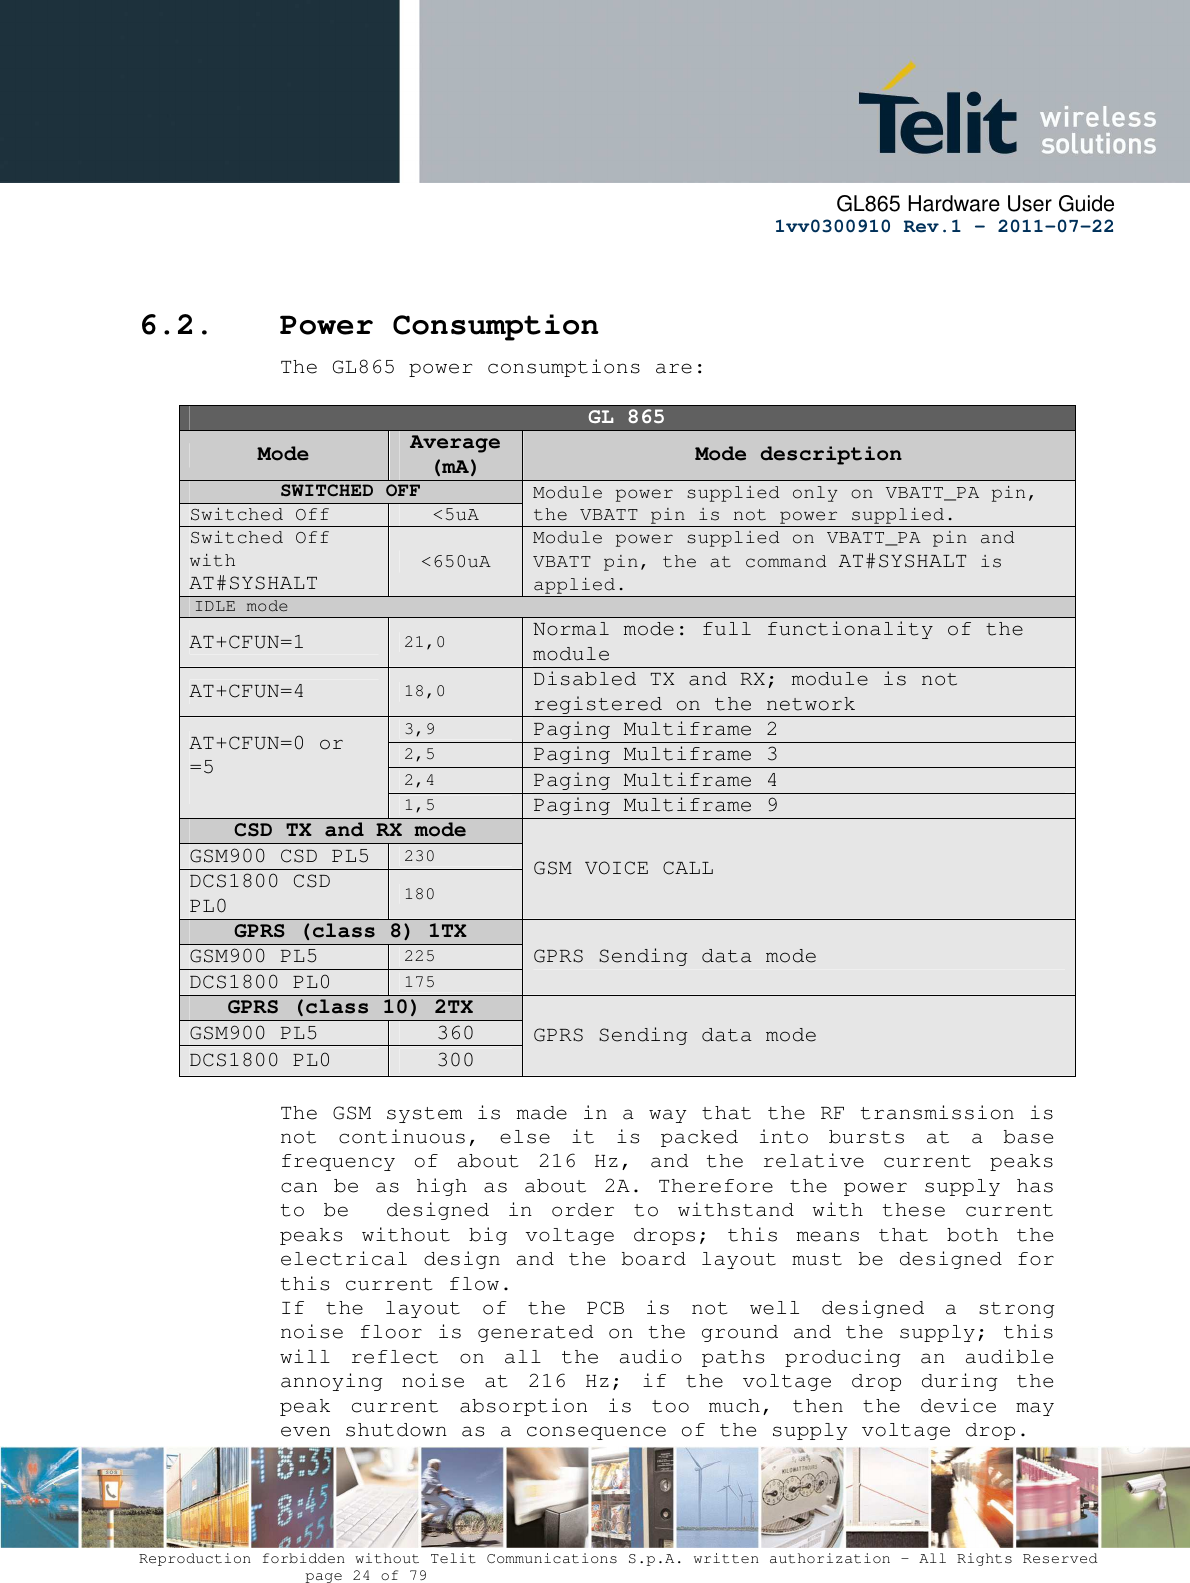      GL865 Hardware User Guide     1vv0300910 Rev.1 – 2011-07-22       Reproduction forbidden without Telit Communications S.p.A. written authorization - All Rights Reserved    page 24 of 79   6.2. Power Consumption The GL865 power consumptions are:   GL 865 Mode  Average (mA)  Mode description SWITCHED OFF  Module power supplied only on VBATT_PA pin, the VBATT pin is not power supplied. Switched Off  &lt;5uA Switched Off with AT#SYSHALT &lt;650uA Module power supplied on VBATT_PA pin and VBATT pin, the at command AT#SYSHALT is applied. IDLE mode AT+CFUN=1 21,0 Normal mode: full functionality of the module AT+CFUN=4 18,0 Disabled TX and RX; module is not registered on the network AT+CFUN=0 or =5  3,9 Paging Multiframe 2 2,5 Paging Multiframe 3 2,4 Paging Multiframe 4 1,5 Paging Multiframe 9 CSD TX and RX mode GSM VOICE CALL GSM900 CSD PL5 230 DCS1800 CSD PL0 180 GPRS (class 8) 1TX  GPRS Sending data mode GSM900 PL5 225 DCS1800 PL0 175 GPRS (class 10) 2TX  GPRS Sending data mode GSM900 PL5  360 DCS1800 PL0  300  The GSM system is made in a way that the RF transmission is not  continuous,  else  it  is  packed  into  bursts  at  a  base frequency  of  about  216  Hz,  and  the  relative  current  peaks can be as high as about 2A. Therefore the power supply has to  be    designed  in  order  to  withstand  with  these  current peaks  without  big  voltage  drops;  this  means  that  both  the electrical design and the board layout must be designed for this current flow. If  the  layout  of  the  PCB  is  not  well  designed  a  strong noise floor is generated on the ground and the supply; this will  reflect  on  all  the  audio  paths  producing  an  audible annoying  noise  at  216  Hz;  if  the  voltage  drop  during  the peak  current  absorption  is  too  much,  then  the  device  may even shutdown as a consequence of the supply voltage drop. 